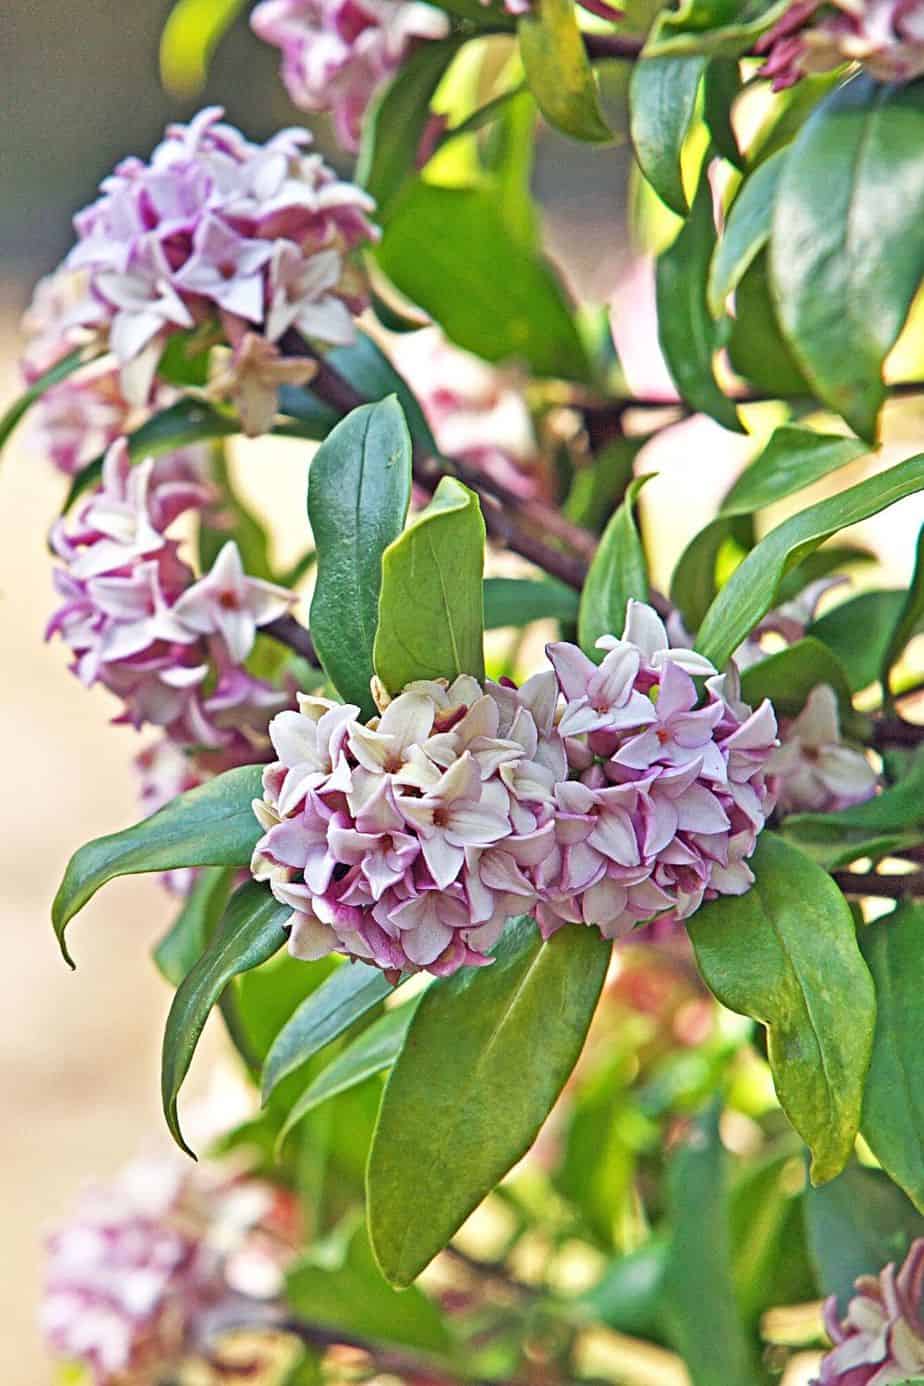 Daphne offers plenty of variety options that you can plant in your northwest facing garden